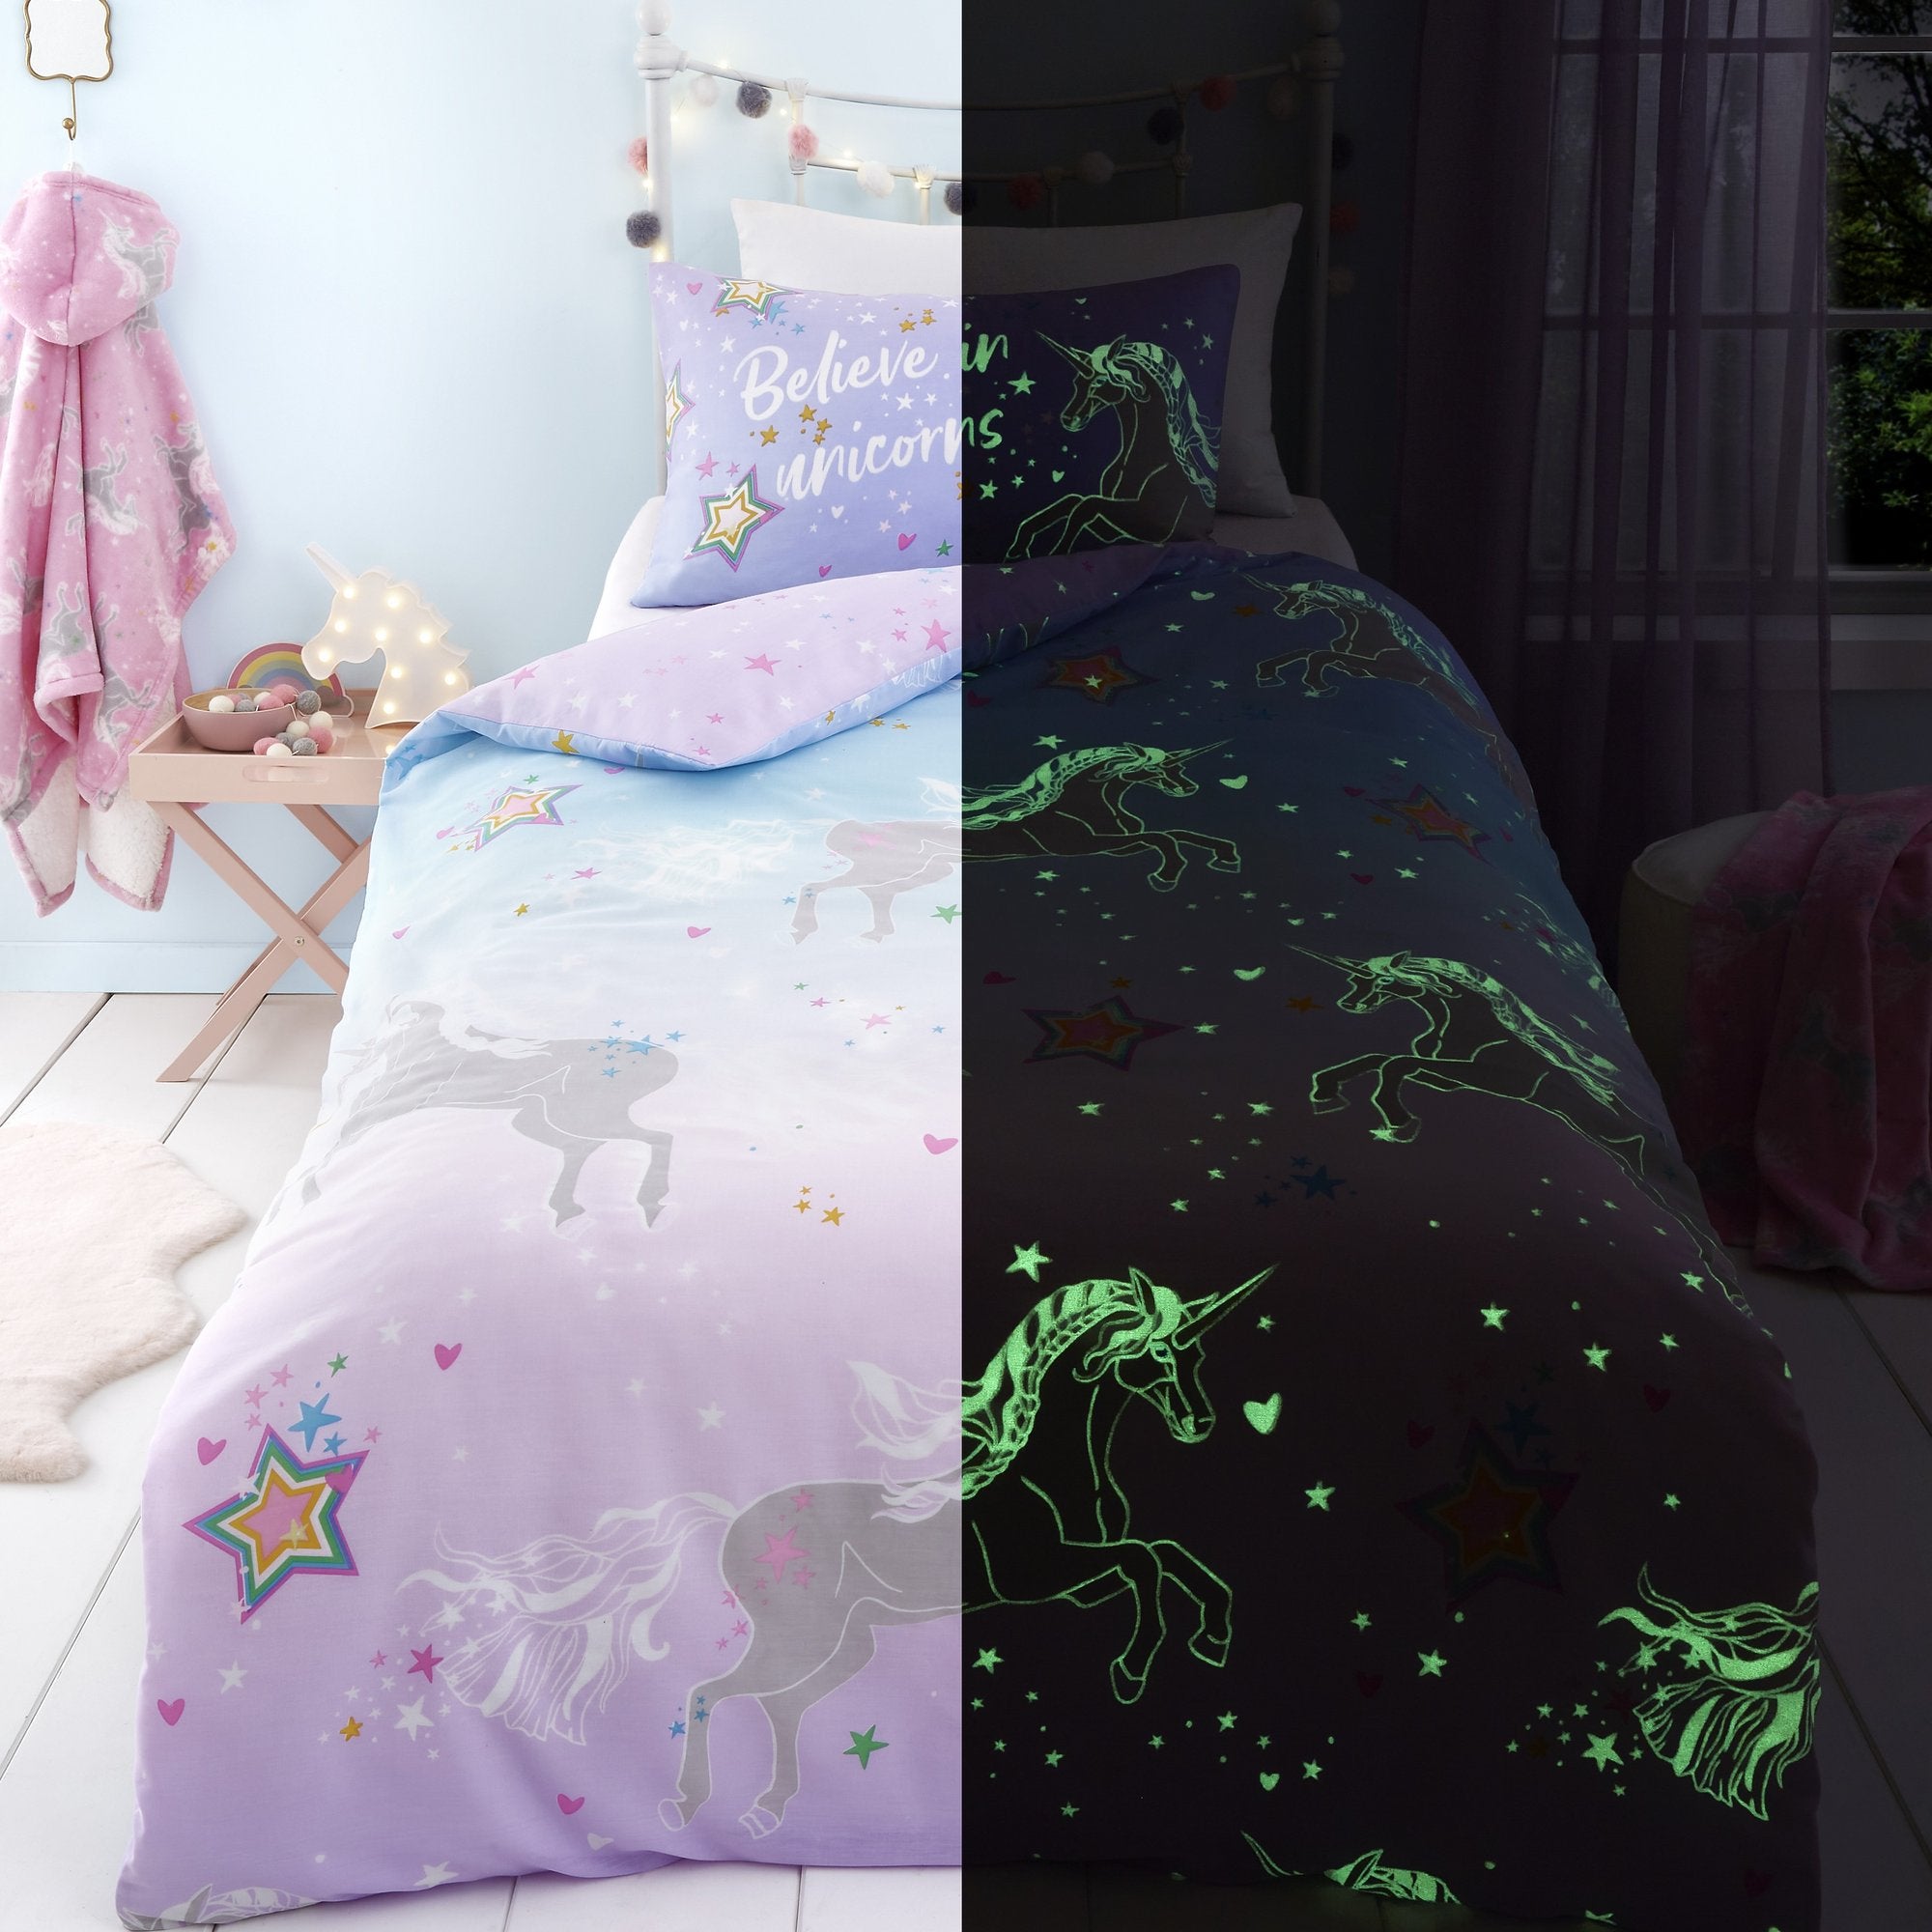 Duvet Cover Set Ombre Unicorn by Bedlam in Lilac